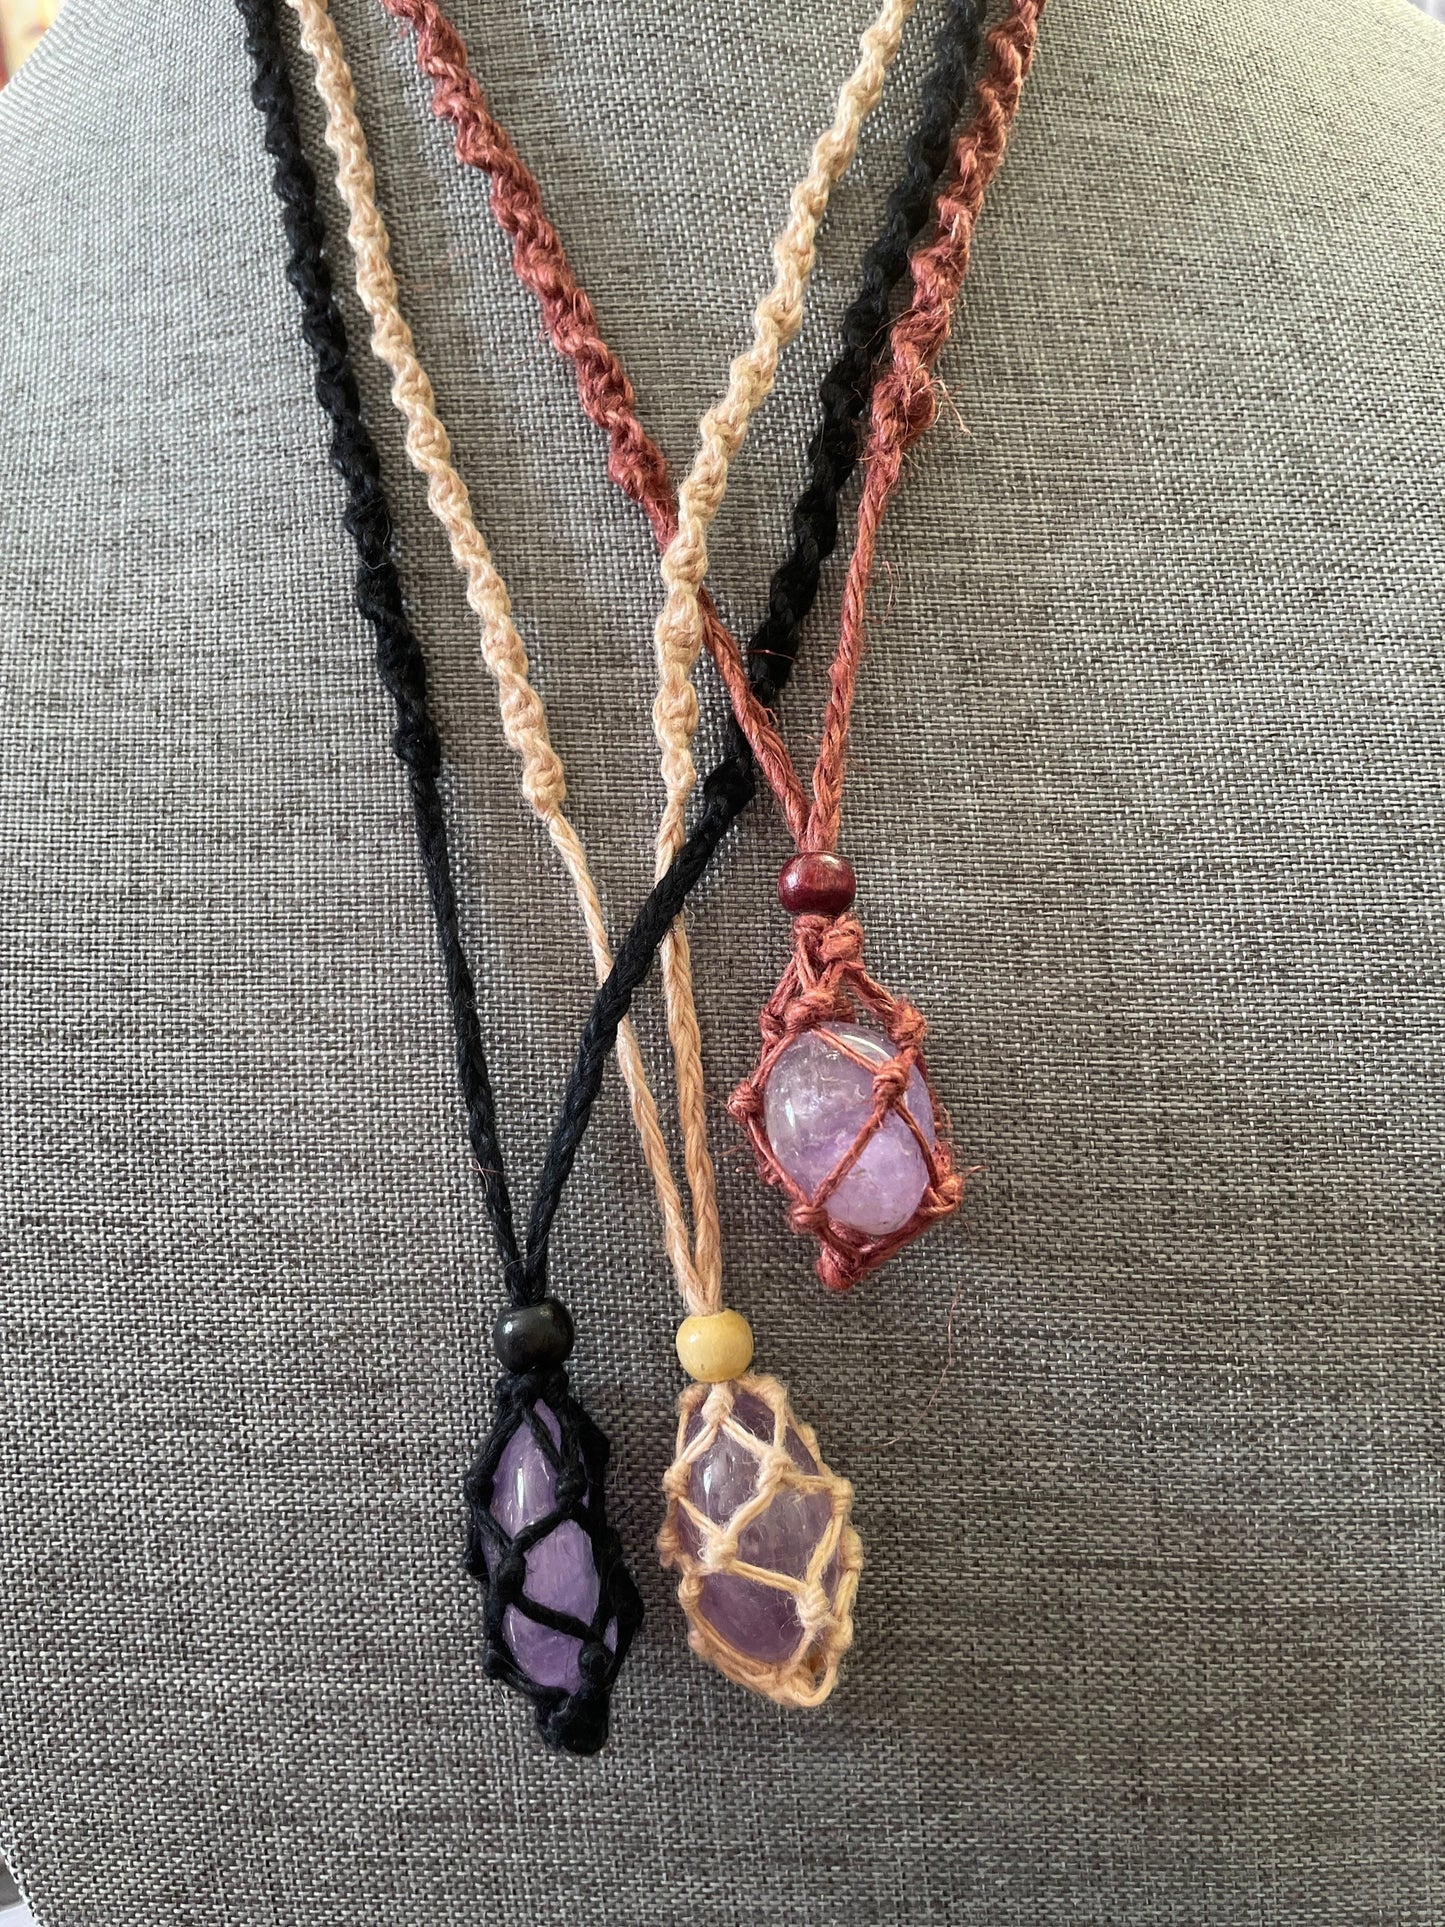 Uniquely crafted Hemp Macramé necklace with Amethyst crystal three colors to choose from